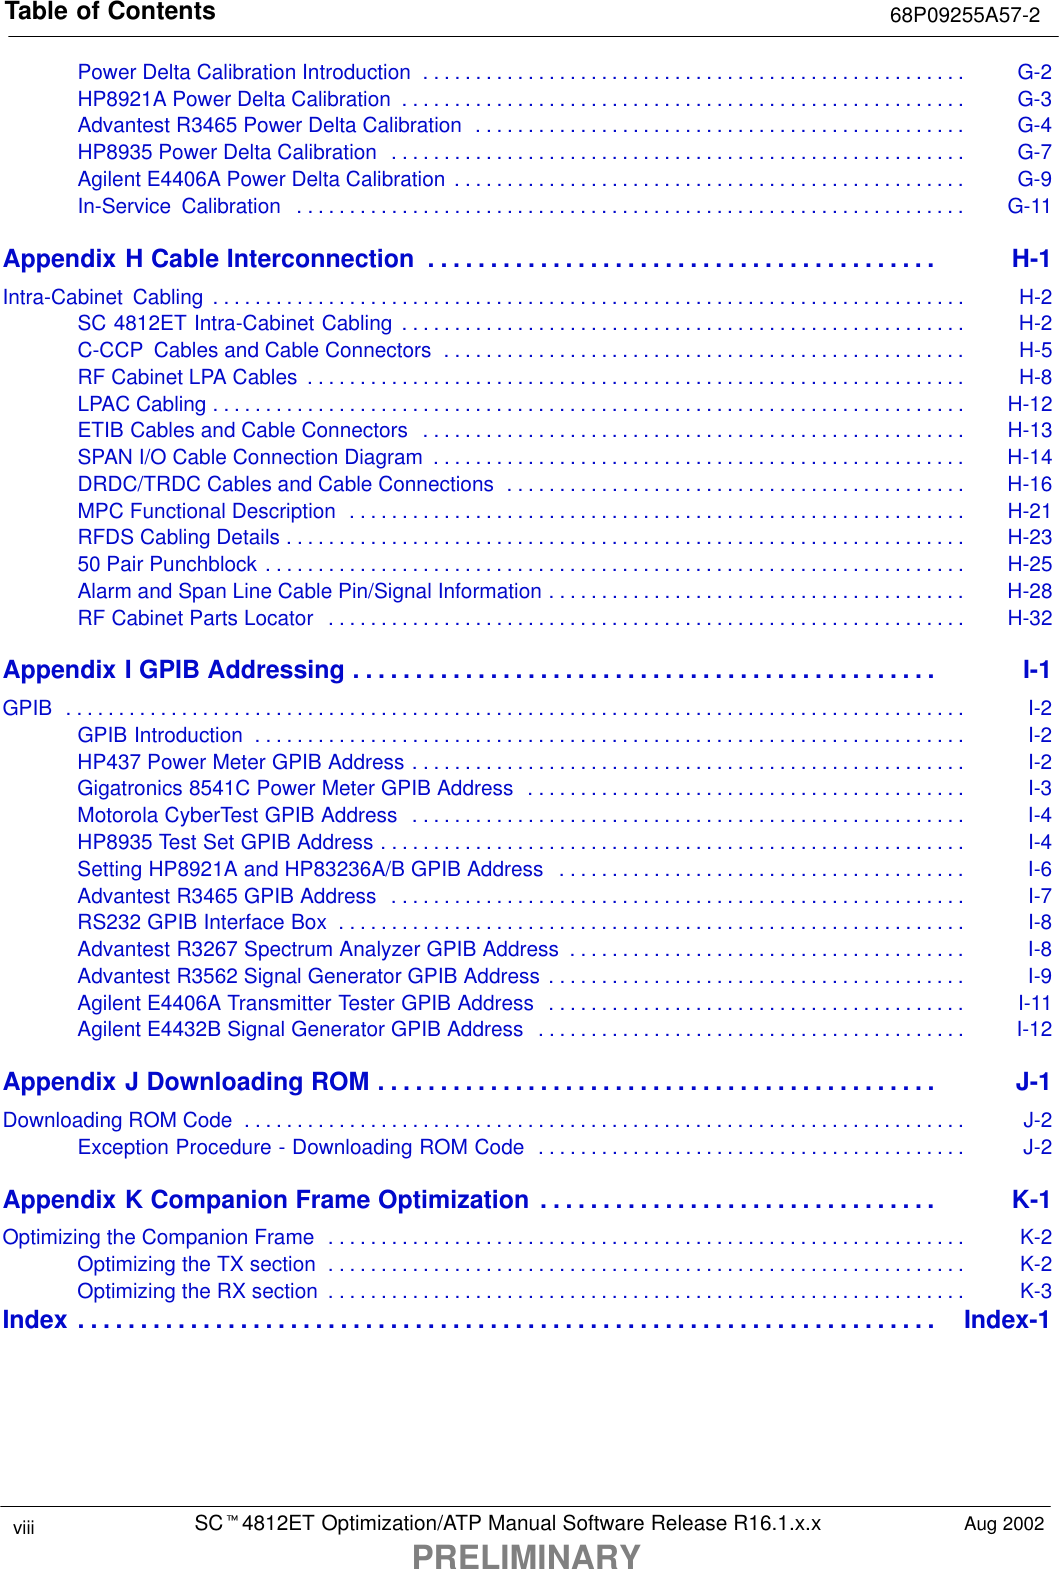 Table of Contents 68P09255A57-2SCt4812ET Optimization/ATP Manual Software Release R16.1.x.xPRELIMINARYviii Aug 2002Power Delta Calibration Introduction G-2. . . . . . . . . . . . . . . . . . . . . . . . . . . . . . . . . . . . . . . . . . . . . . . . . . . . HP8921A Power Delta Calibration G-3. . . . . . . . . . . . . . . . . . . . . . . . . . . . . . . . . . . . . . . . . . . . . . . . . . . . . . Advantest R3465 Power Delta Calibration G-4. . . . . . . . . . . . . . . . . . . . . . . . . . . . . . . . . . . . . . . . . . . . . . . HP8935 Power Delta Calibration G-7. . . . . . . . . . . . . . . . . . . . . . . . . . . . . . . . . . . . . . . . . . . . . . . . . . . . . . . Agilent E4406A Power Delta Calibration G-9. . . . . . . . . . . . . . . . . . . . . . . . . . . . . . . . . . . . . . . . . . . . . . . . . In-Service  Calibration G-11. . . . . . . . . . . . . . . . . . . . . . . . . . . . . . . . . . . . . . . . . . . . . . . . . . . . . . . . . . . . . . . . Appendix H Cable Interconnection H-1. . . . . . . . . . . . . . . . . . . . . . . . . . . . . . . . . . . . . . . . . Intra-Cabinet Cabling H-2. . . . . . . . . . . . . . . . . . . . . . . . . . . . . . . . . . . . . . . . . . . . . . . . . . . . . . . . . . . . . . . . . . . . . . . . SC 4812ET Intra-Cabinet Cabling H-2. . . . . . . . . . . . . . . . . . . . . . . . . . . . . . . . . . . . . . . . . . . . . . . . . . . . . . C-CCP  Cables and Cable Connectors H-5. . . . . . . . . . . . . . . . . . . . . . . . . . . . . . . . . . . . . . . . . . . . . . . . . . RF Cabinet LPA Cables H-8. . . . . . . . . . . . . . . . . . . . . . . . . . . . . . . . . . . . . . . . . . . . . . . . . . . . . . . . . . . . . . . LPAC Cabling H-12. . . . . . . . . . . . . . . . . . . . . . . . . . . . . . . . . . . . . . . . . . . . . . . . . . . . . . . . . . . . . . . . . . . . . . . . ETIB Cables and Cable Connectors H-13. . . . . . . . . . . . . . . . . . . . . . . . . . . . . . . . . . . . . . . . . . . . . . . . . . . . SPAN I/O Cable Connection Diagram H-14. . . . . . . . . . . . . . . . . . . . . . . . . . . . . . . . . . . . . . . . . . . . . . . . . . . DRDC/TRDC Cables and Cable Connections H-16. . . . . . . . . . . . . . . . . . . . . . . . . . . . . . . . . . . . . . . . . . . . MPC Functional Description H-21. . . . . . . . . . . . . . . . . . . . . . . . . . . . . . . . . . . . . . . . . . . . . . . . . . . . . . . . . . . RFDS Cabling Details H-23. . . . . . . . . . . . . . . . . . . . . . . . . . . . . . . . . . . . . . . . . . . . . . . . . . . . . . . . . . . . . . . . . 50 Pair Punchblock H-25. . . . . . . . . . . . . . . . . . . . . . . . . . . . . . . . . . . . . . . . . . . . . . . . . . . . . . . . . . . . . . . . . . . Alarm and Span Line Cable Pin/Signal Information H-28. . . . . . . . . . . . . . . . . . . . . . . . . . . . . . . . . . . . . . . . RF Cabinet Parts Locator H-32. . . . . . . . . . . . . . . . . . . . . . . . . . . . . . . . . . . . . . . . . . . . . . . . . . . . . . . . . . . . . Appendix I GPIB Addressing I-1. . . . . . . . . . . . . . . . . . . . . . . . . . . . . . . . . . . . . . . . . . . . . . . GPIB I-2. . . . . . . . . . . . . . . . . . . . . . . . . . . . . . . . . . . . . . . . . . . . . . . . . . . . . . . . . . . . . . . . . . . . . . . . . . . . . . . . . . . . . . GPIB Introduction I-2. . . . . . . . . . . . . . . . . . . . . . . . . . . . . . . . . . . . . . . . . . . . . . . . . . . . . . . . . . . . . . . . . . . . HP437 Power Meter GPIB Address I-2. . . . . . . . . . . . . . . . . . . . . . . . . . . . . . . . . . . . . . . . . . . . . . . . . . . . . Gigatronics 8541C Power Meter GPIB Address I-3. . . . . . . . . . . . . . . . . . . . . . . . . . . . . . . . . . . . . . . . . . Motorola CyberTest GPIB Address I-4. . . . . . . . . . . . . . . . . . . . . . . . . . . . . . . . . . . . . . . . . . . . . . . . . . . . . HP8935 Test Set GPIB Address I-4. . . . . . . . . . . . . . . . . . . . . . . . . . . . . . . . . . . . . . . . . . . . . . . . . . . . . . . . Setting HP8921A and HP83236A/B GPIB Address I-6. . . . . . . . . . . . . . . . . . . . . . . . . . . . . . . . . . . . . . . Advantest R3465 GPIB Address I-7. . . . . . . . . . . . . . . . . . . . . . . . . . . . . . . . . . . . . . . . . . . . . . . . . . . . . . . RS232 GPIB Interface Box I-8. . . . . . . . . . . . . . . . . . . . . . . . . . . . . . . . . . . . . . . . . . . . . . . . . . . . . . . . . . . . Advantest R3267 Spectrum Analyzer GPIB Address I-8. . . . . . . . . . . . . . . . . . . . . . . . . . . . . . . . . . . . . . Advantest R3562 Signal Generator GPIB Address I-9. . . . . . . . . . . . . . . . . . . . . . . . . . . . . . . . . . . . . . . . Agilent E4406A Transmitter Tester GPIB Address I-11. . . . . . . . . . . . . . . . . . . . . . . . . . . . . . . . . . . . . . . . Agilent E4432B Signal Generator GPIB Address I-12. . . . . . . . . . . . . . . . . . . . . . . . . . . . . . . . . . . . . . . . . Appendix J Downloading ROM J-1. . . . . . . . . . . . . . . . . . . . . . . . . . . . . . . . . . . . . . . . . . . . . Downloading ROM Code J-2. . . . . . . . . . . . . . . . . . . . . . . . . . . . . . . . . . . . . . . . . . . . . . . . . . . . . . . . . . . . . . . . . . . . . Exception Procedure - Downloading ROM Code J-2. . . . . . . . . . . . . . . . . . . . . . . . . . . . . . . . . . . . . . . . . Appendix K Companion Frame Optimization K-1. . . . . . . . . . . . . . . . . . . . . . . . . . . . . . . . Optimizing the Companion Frame K-2. . . . . . . . . . . . . . . . . . . . . . . . . . . . . . . . . . . . . . . . . . . . . . . . . . . . . . . . . . . . . Optimizing the TX section K-2. . . . . . . . . . . . . . . . . . . . . . . . . . . . . . . . . . . . . . . . . . . . . . . . . . . . . . . . . . . . . Optimizing the RX section K-3. . . . . . . . . . . . . . . . . . . . . . . . . . . . . . . . . . . . . . . . . . . . . . . . . . . . . . . . . . . . . Index Index-1. . . . . . . . . . . . . . . . . . . . . . . . . . . . . . . . . . . . . . . . . . . . . . . . . . . . . . . . . . . . . . . . . . . . . 